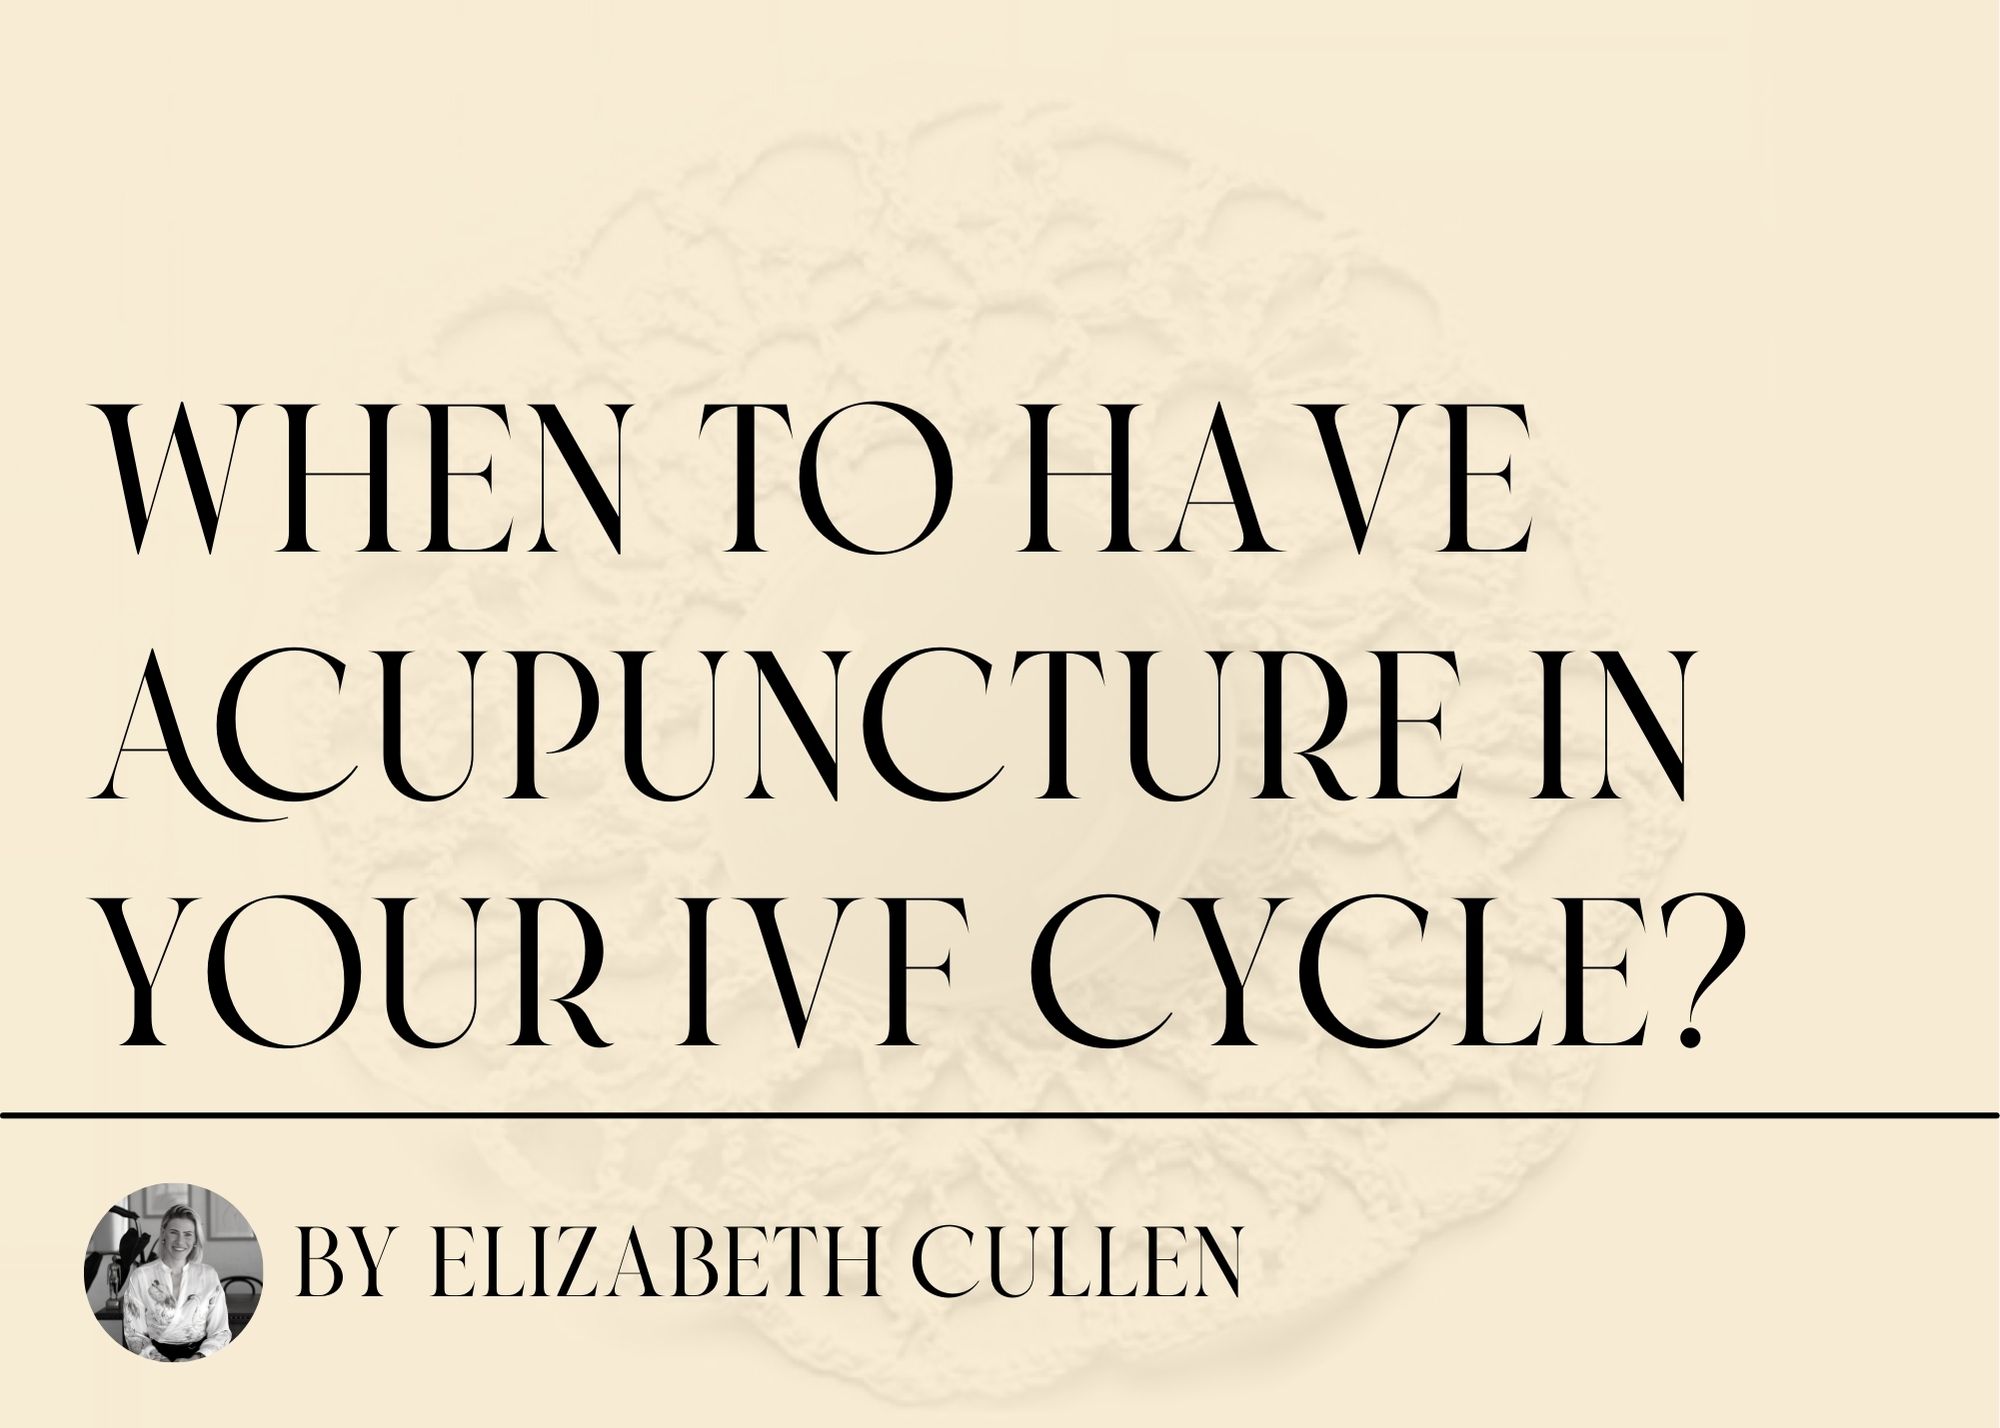 When to have Acupuncture in your IVF cycle?